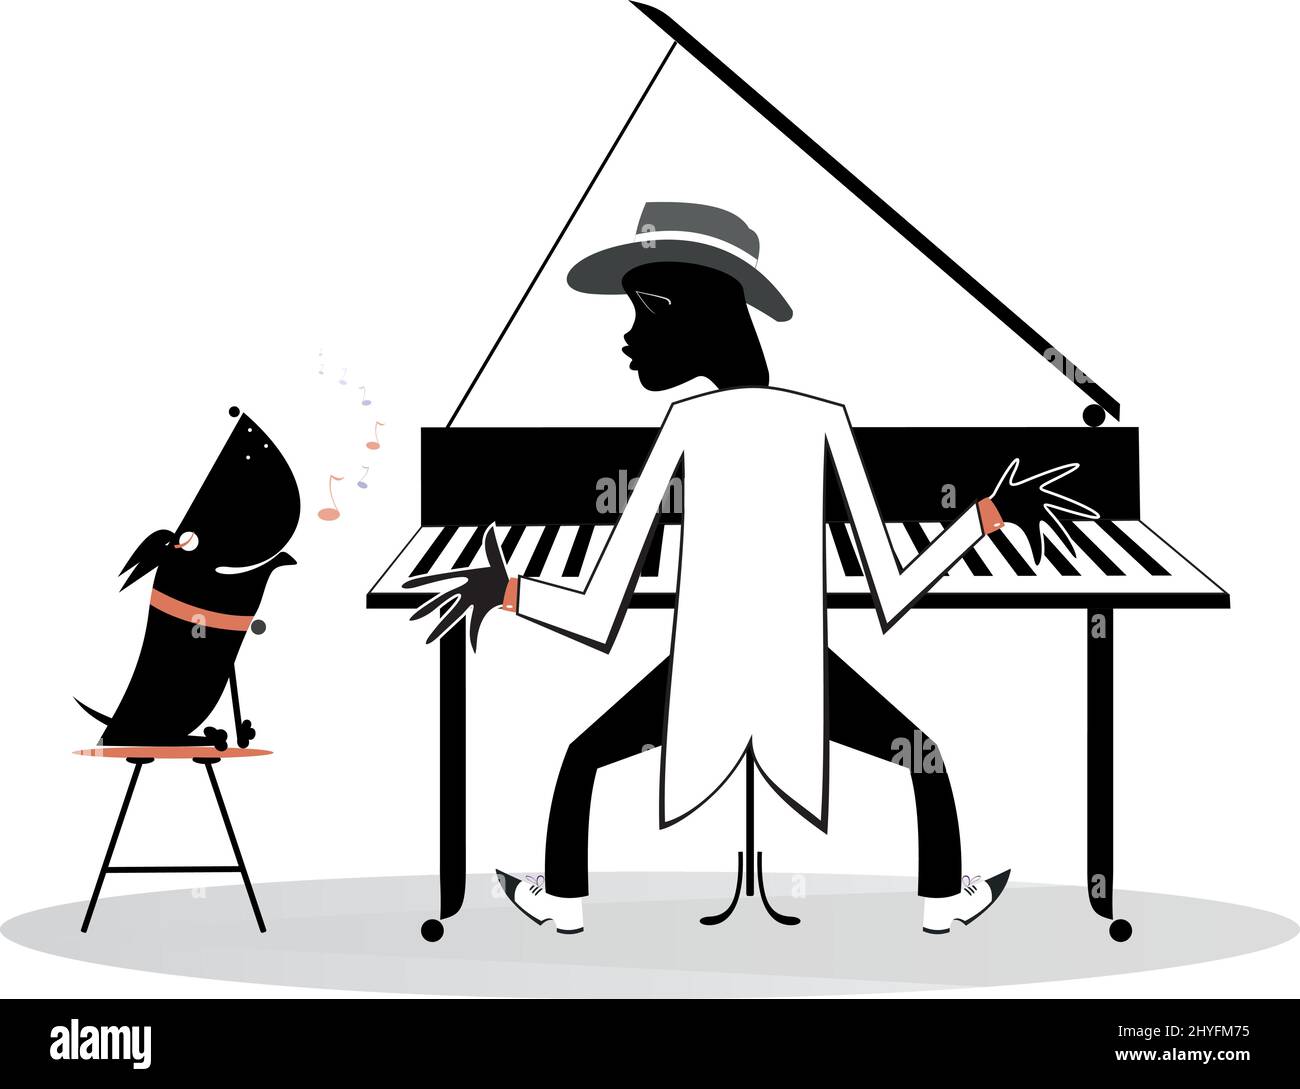 Pianist, piano and a howling dog illustration. African pianist plays piano and the dog howls isolated on white background Stock Vector